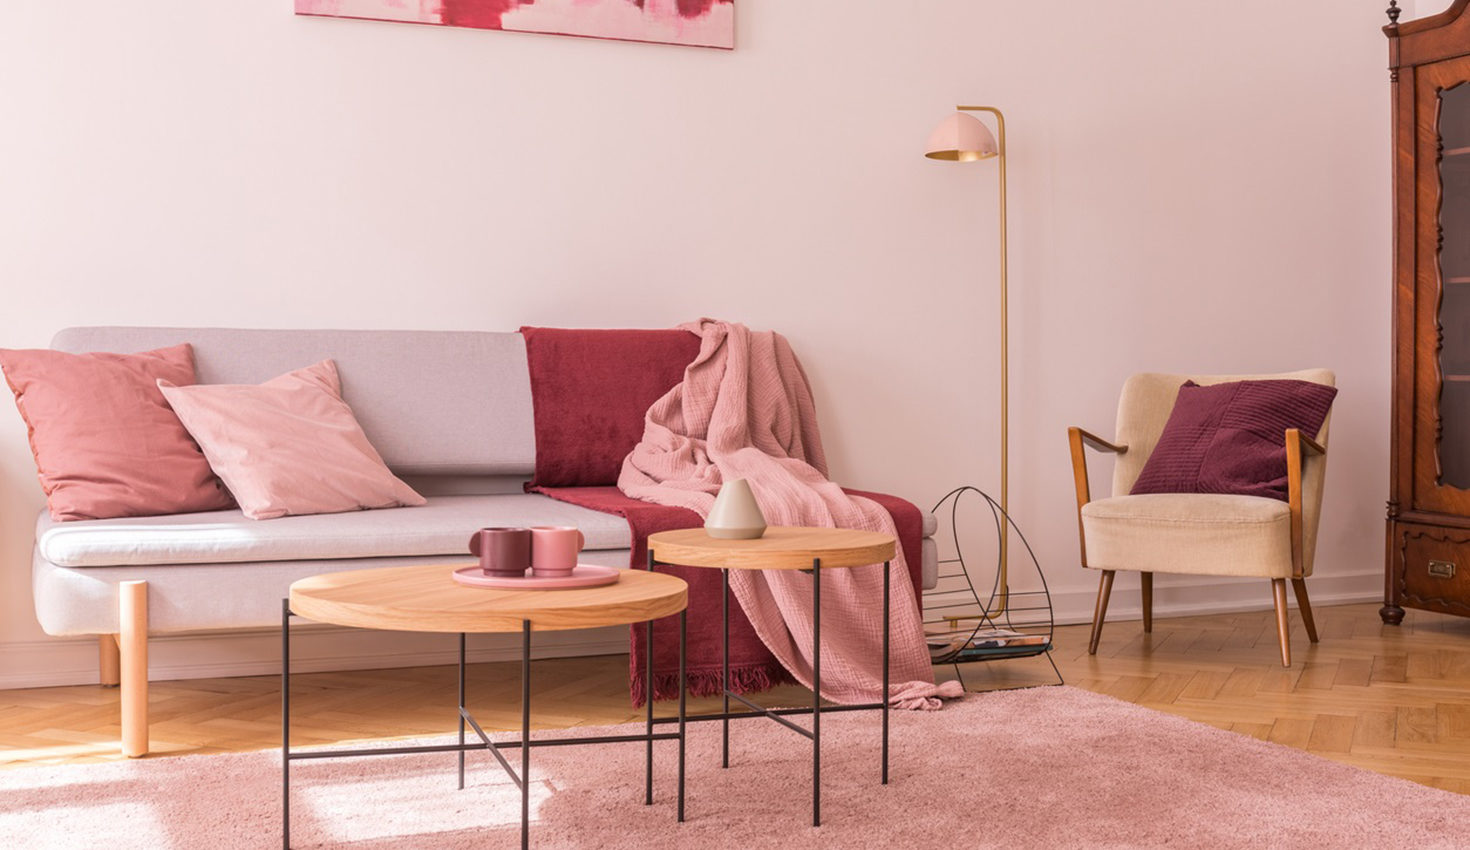 Two wooden coffee tables next to modern grey sofa with pillows and blankets in lovely pastel pink living room interior